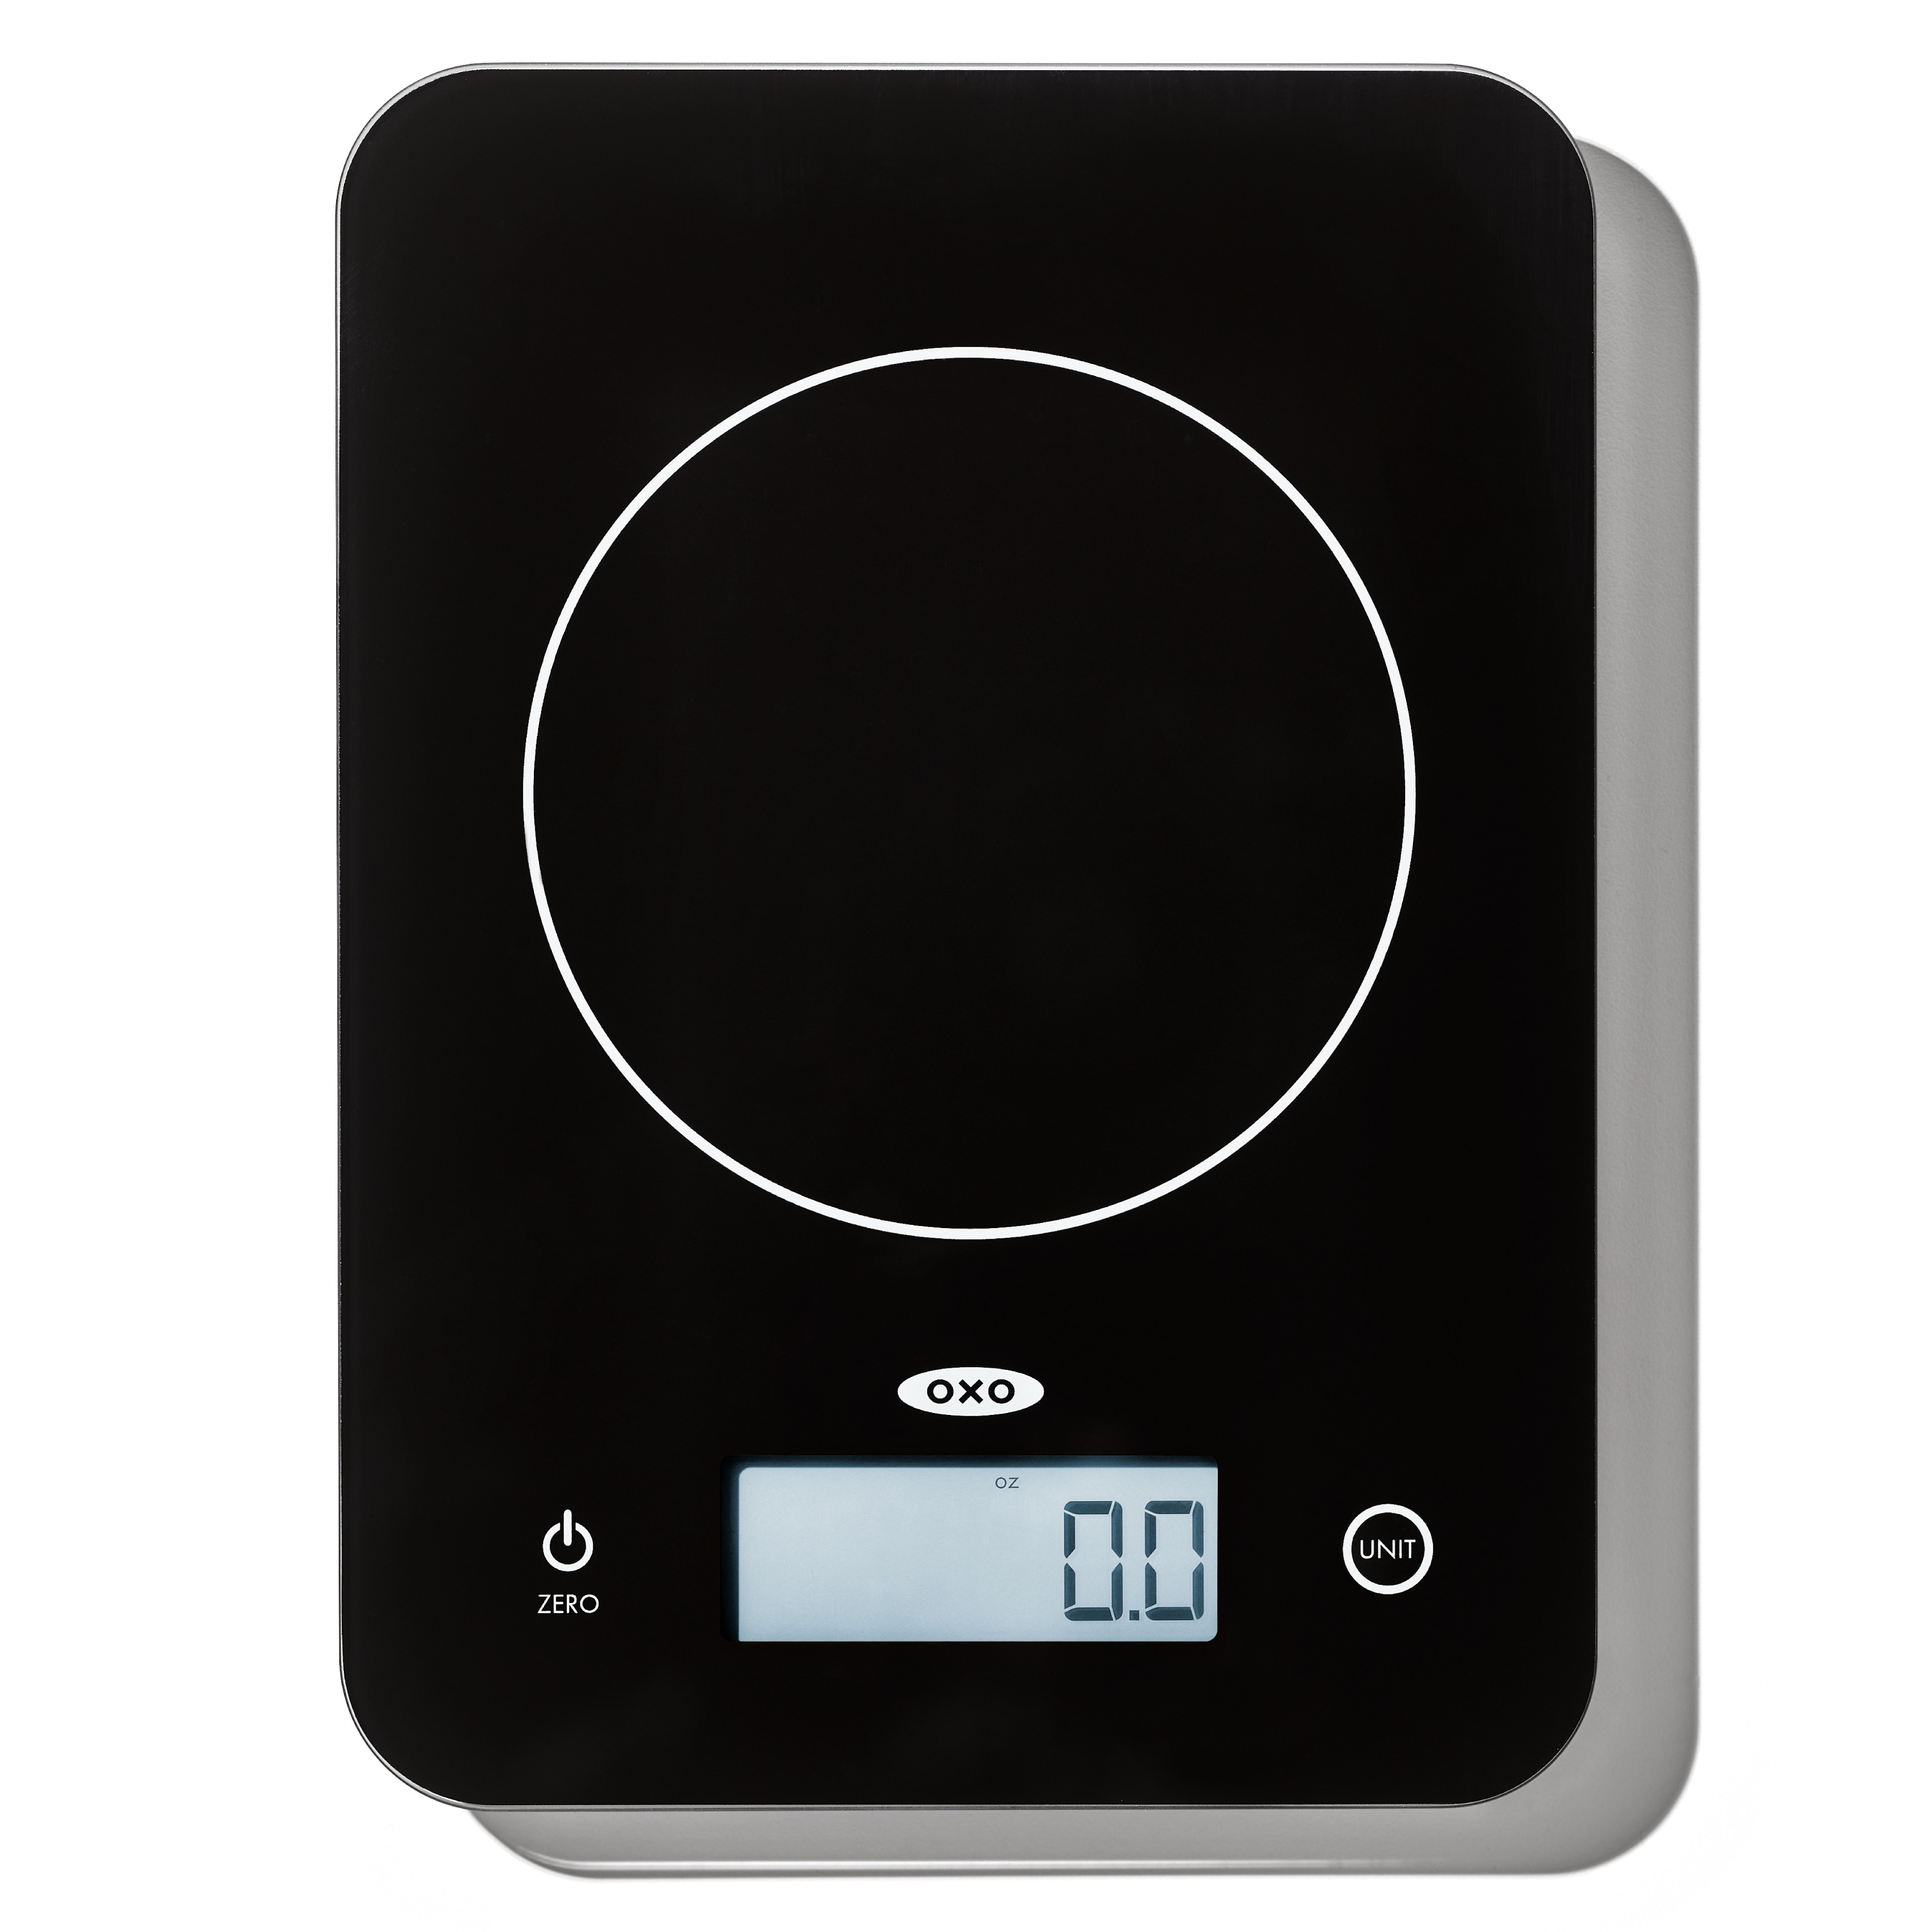 OXO Good Grips 5 Pound Food Scale with Pull-Out Display - Black